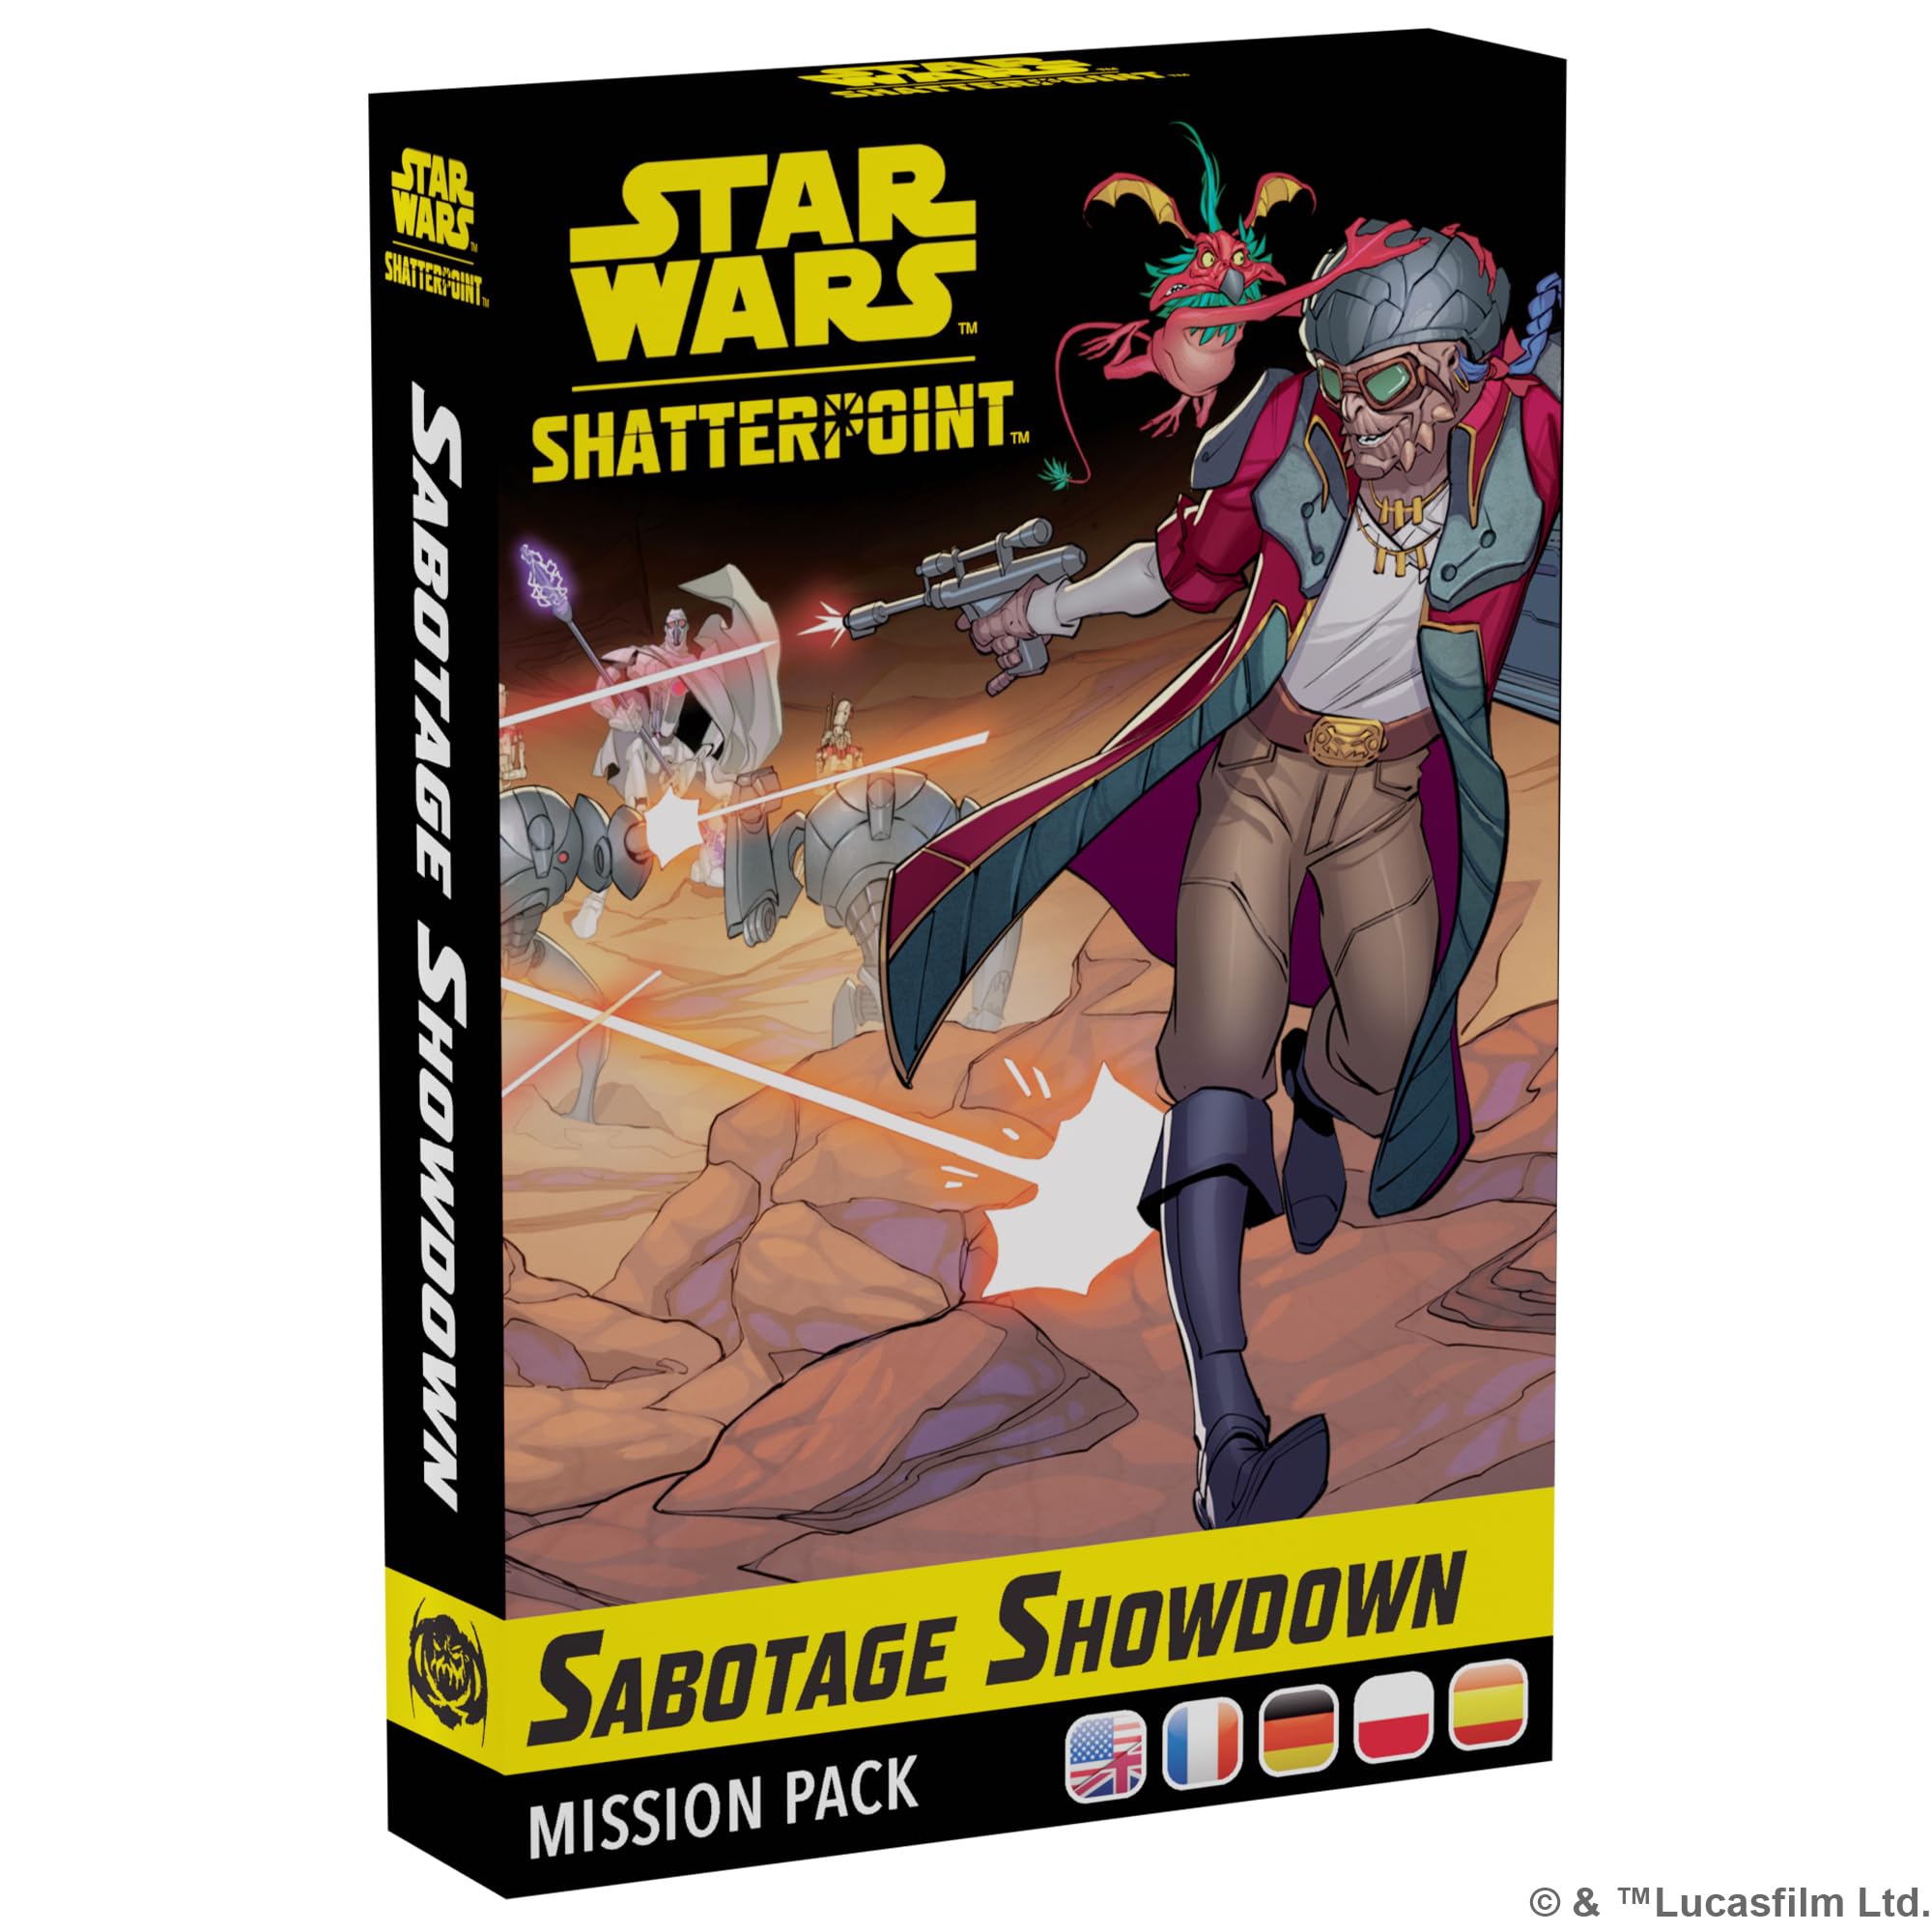 Star Wars Shatterpoint Sabotage Showdown Mission Pack - Tabletop Miniatures Game, Strategy Game for Kids and Adults, Ages 14+, 2 Players, 90 Min Playtime, Made by Atomic Mass Games